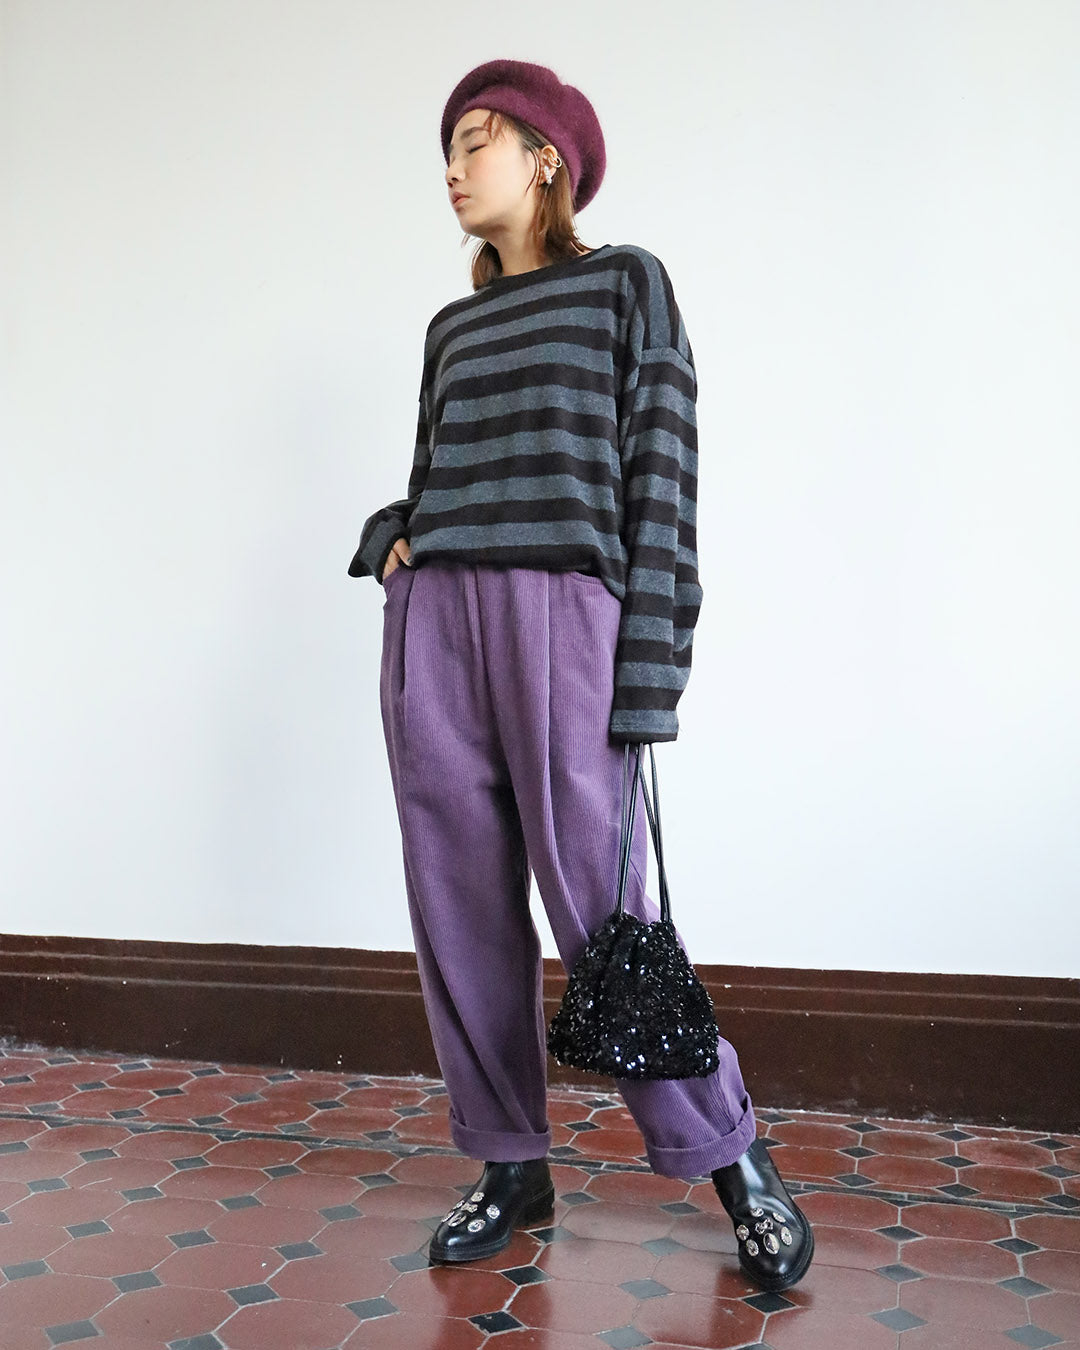 Relaxed Corduroy Pants